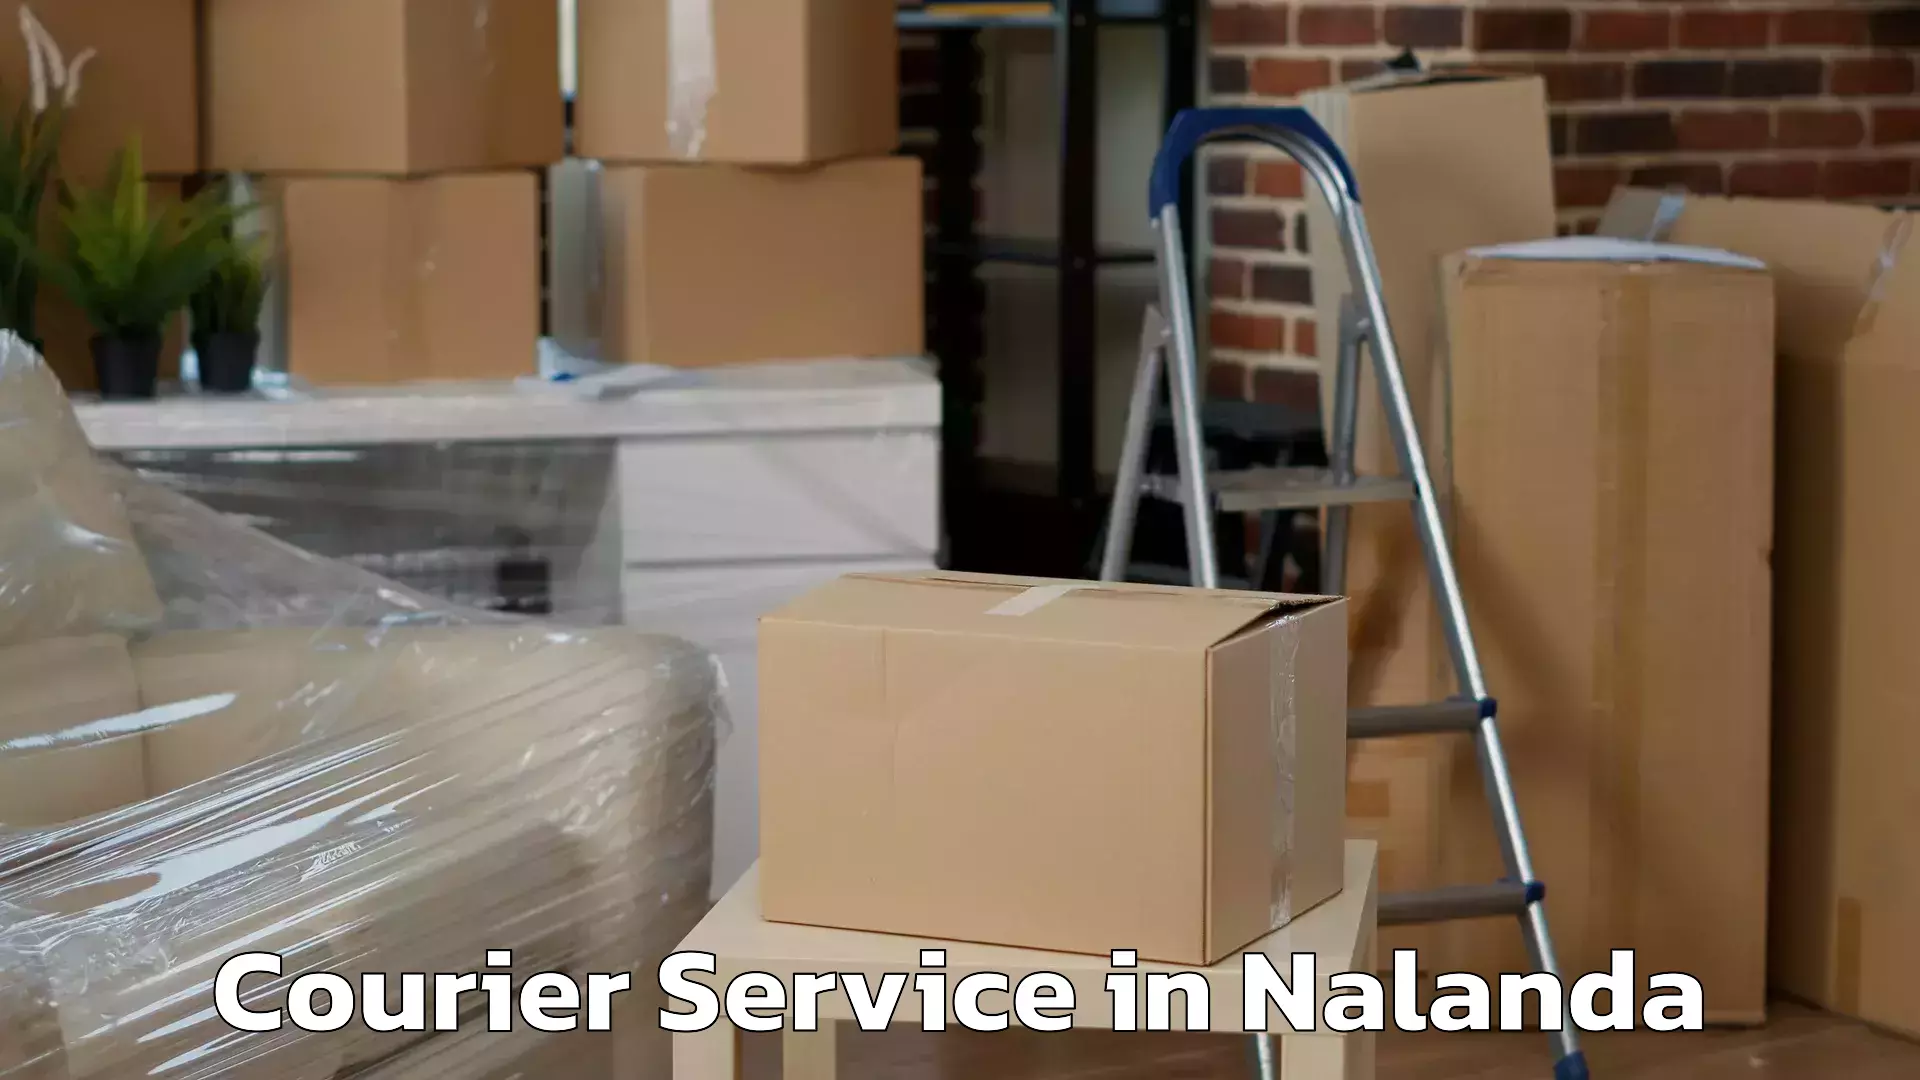 Customized delivery options in Nalanda